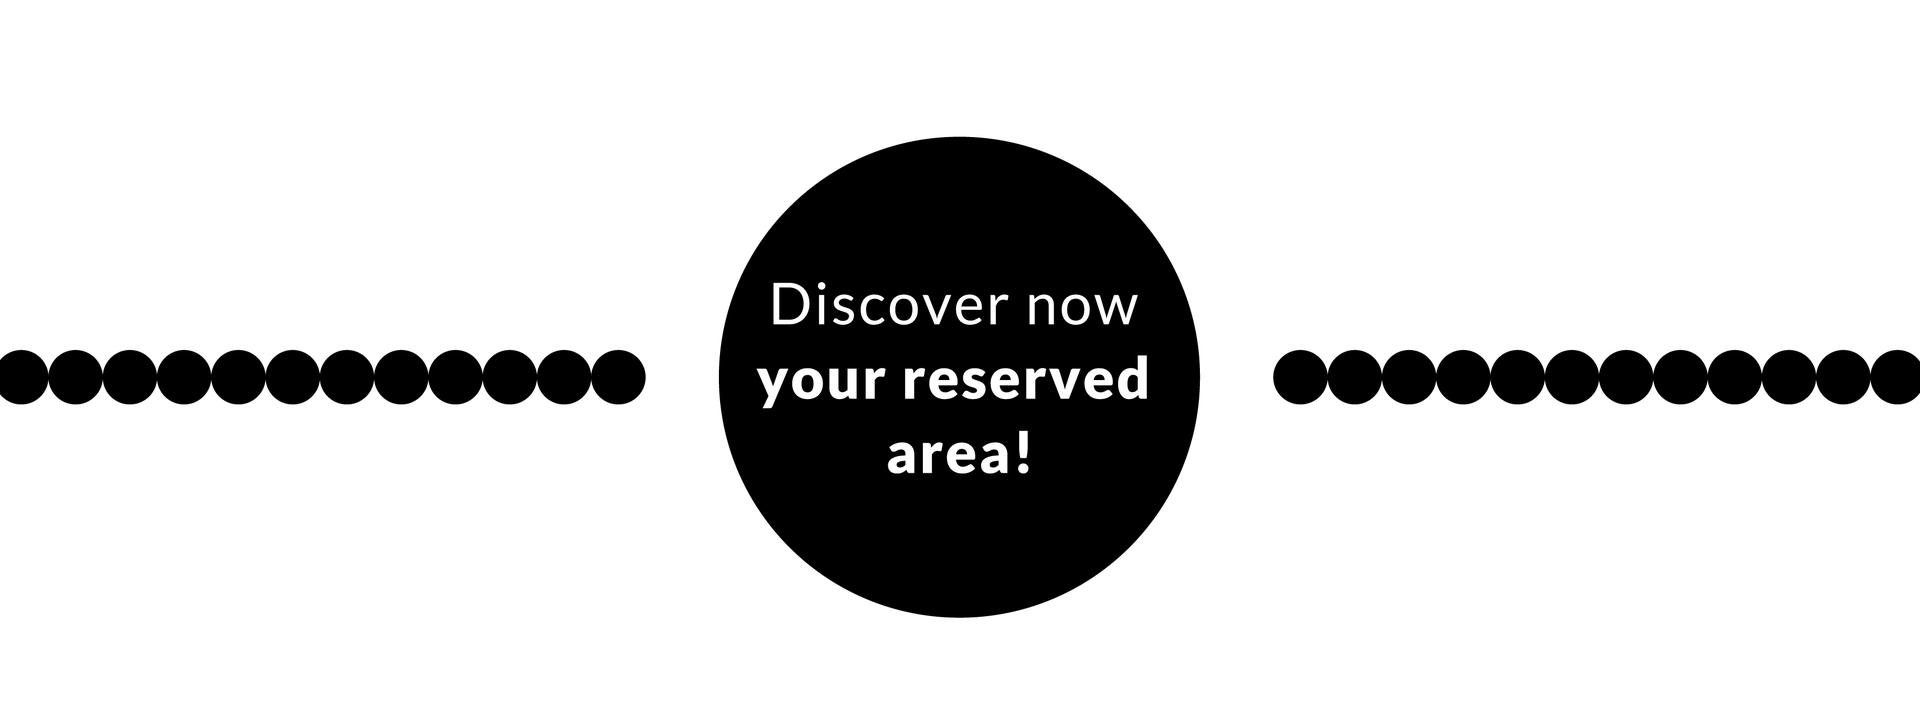 Discover now your reserved area!